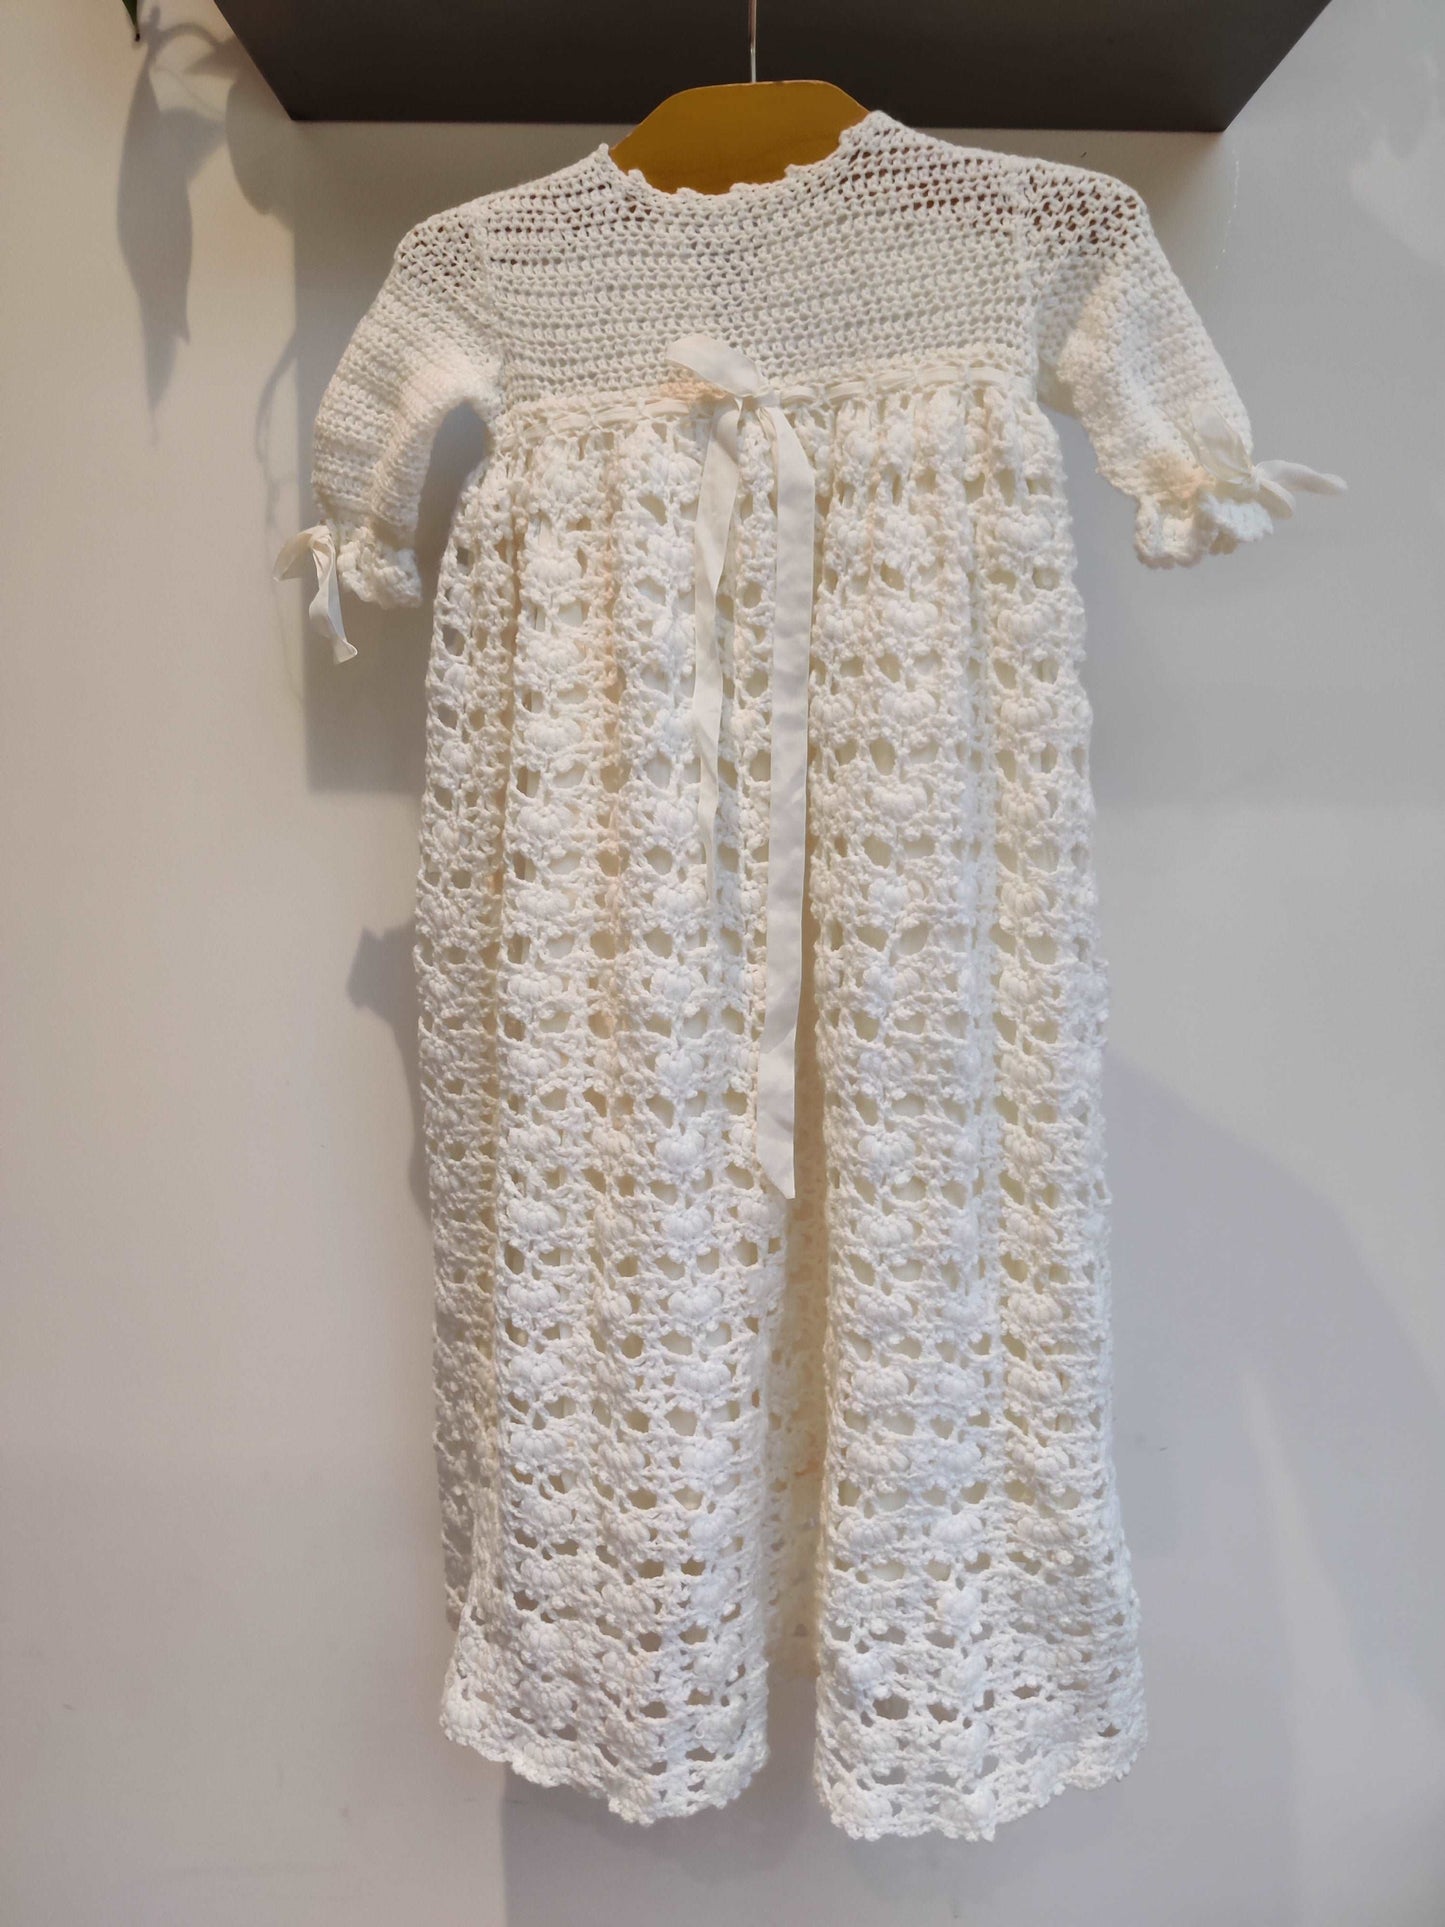 Crochet christening dress with hat and cardigan